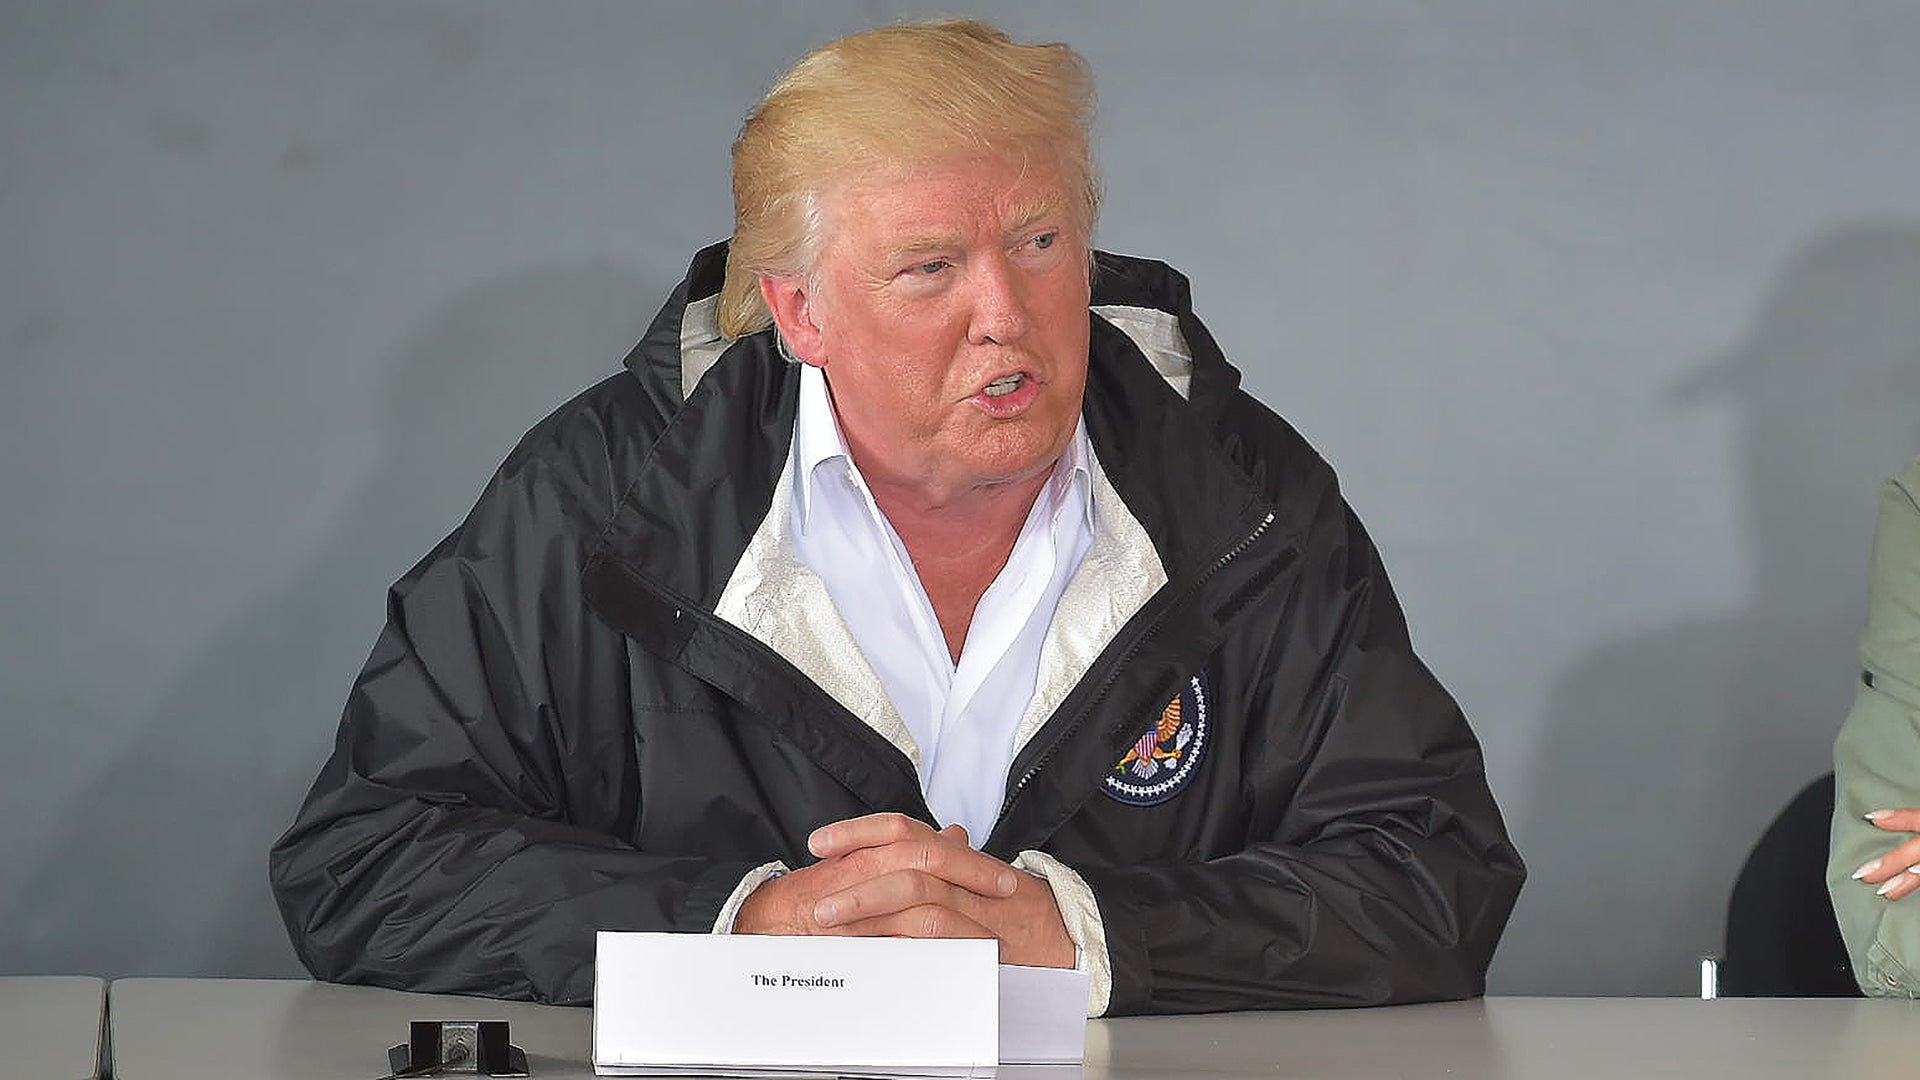 Trump Suddenly Starts Blabbering About The F-35 During Puerto Rico Recovery Meeting